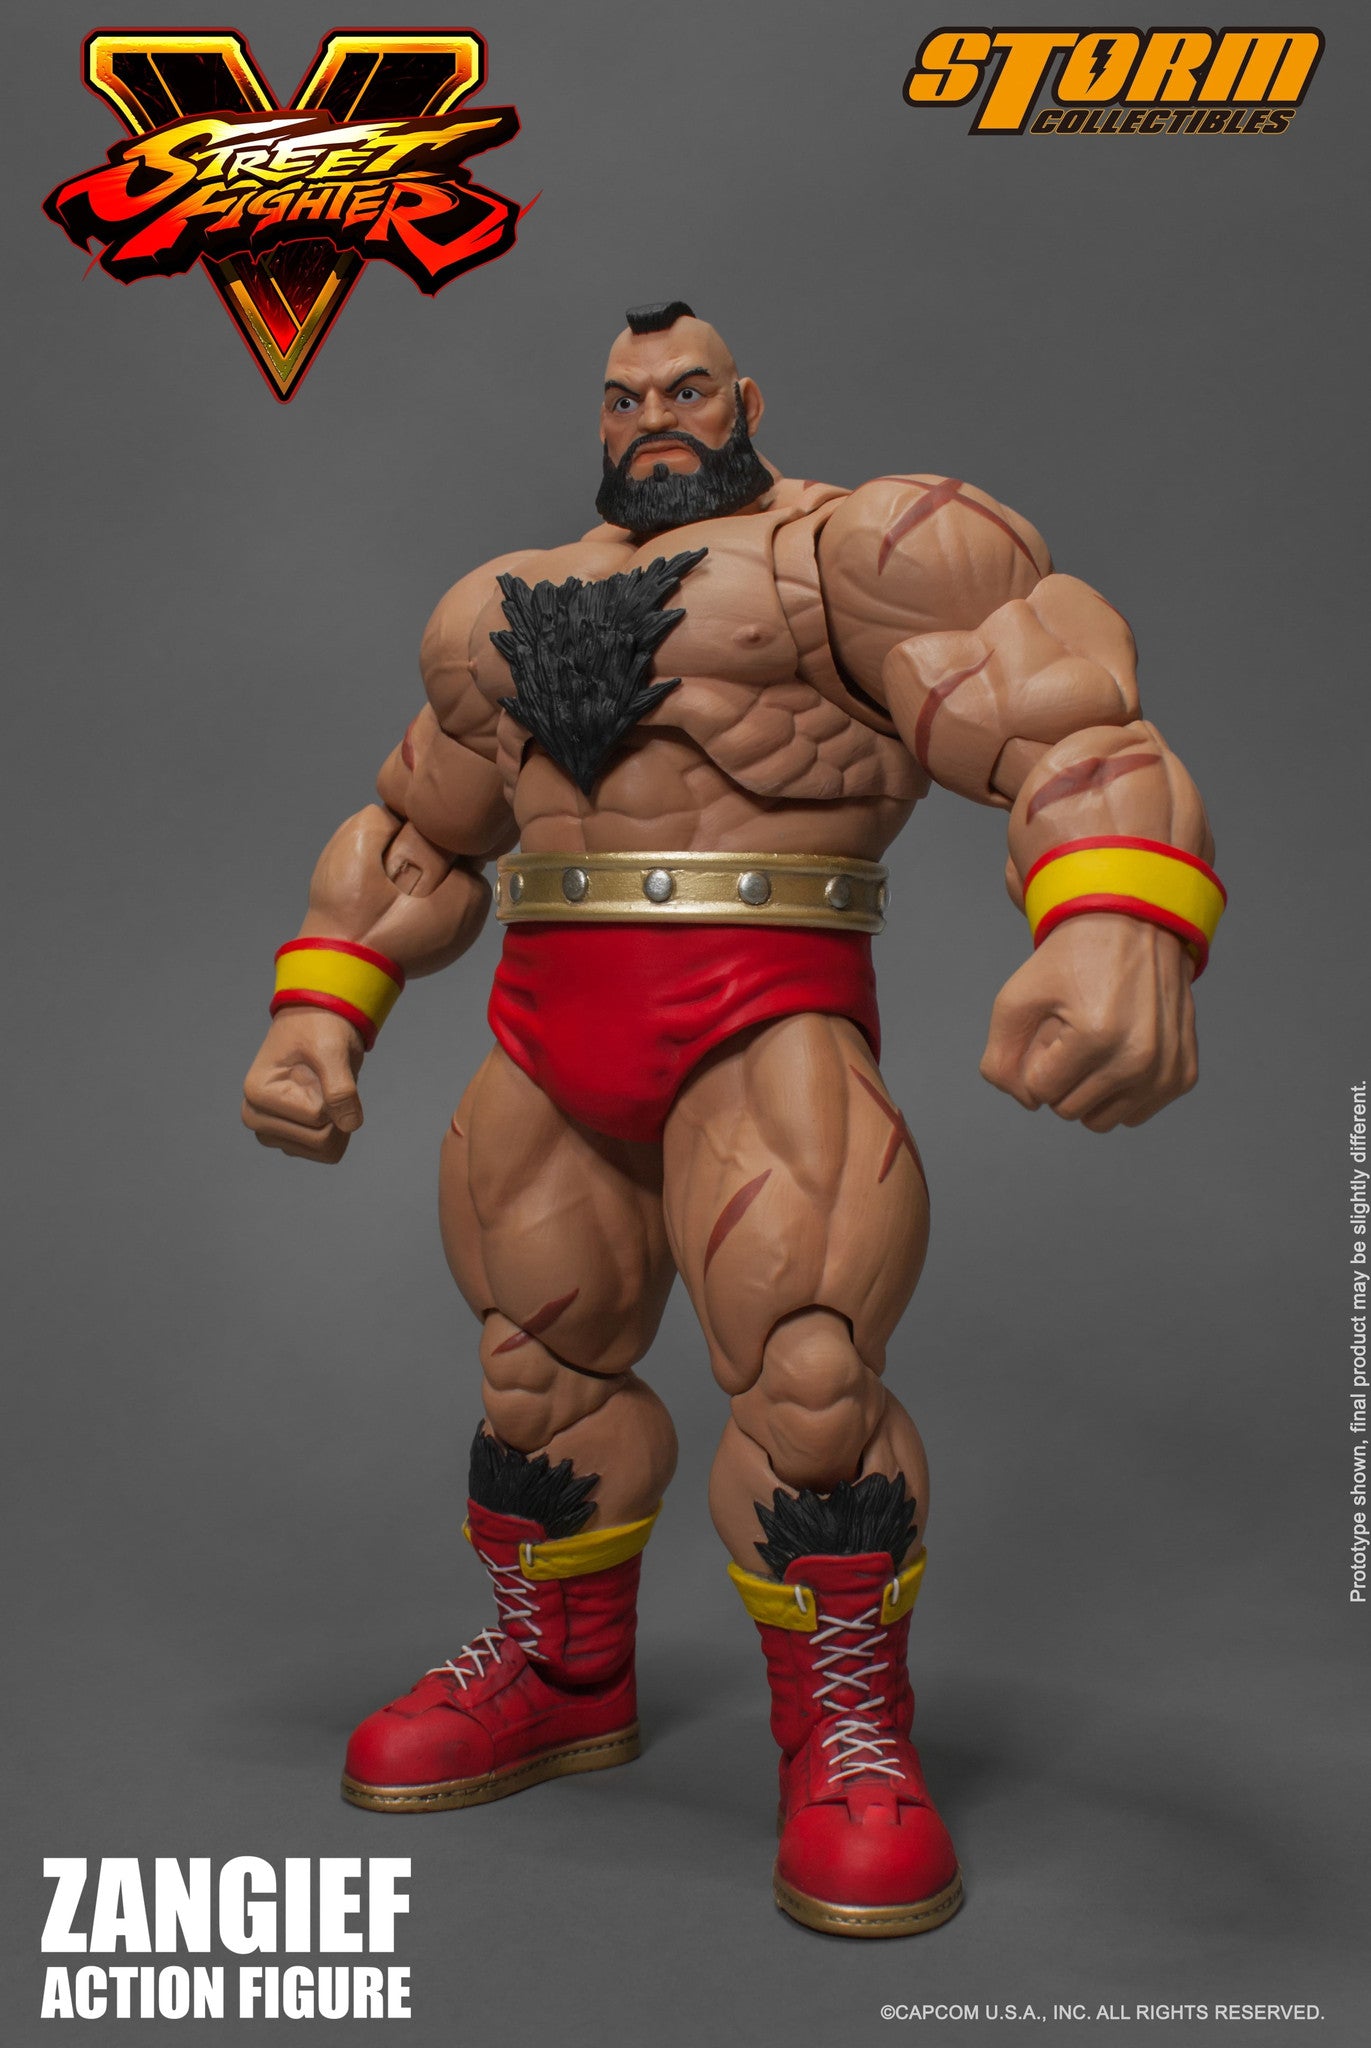 Storm Collectibles presents the Ultra Street Fighter II Action Figure -  ZANGIEF! Zangief is one of the most popular, iconic, biggest and…